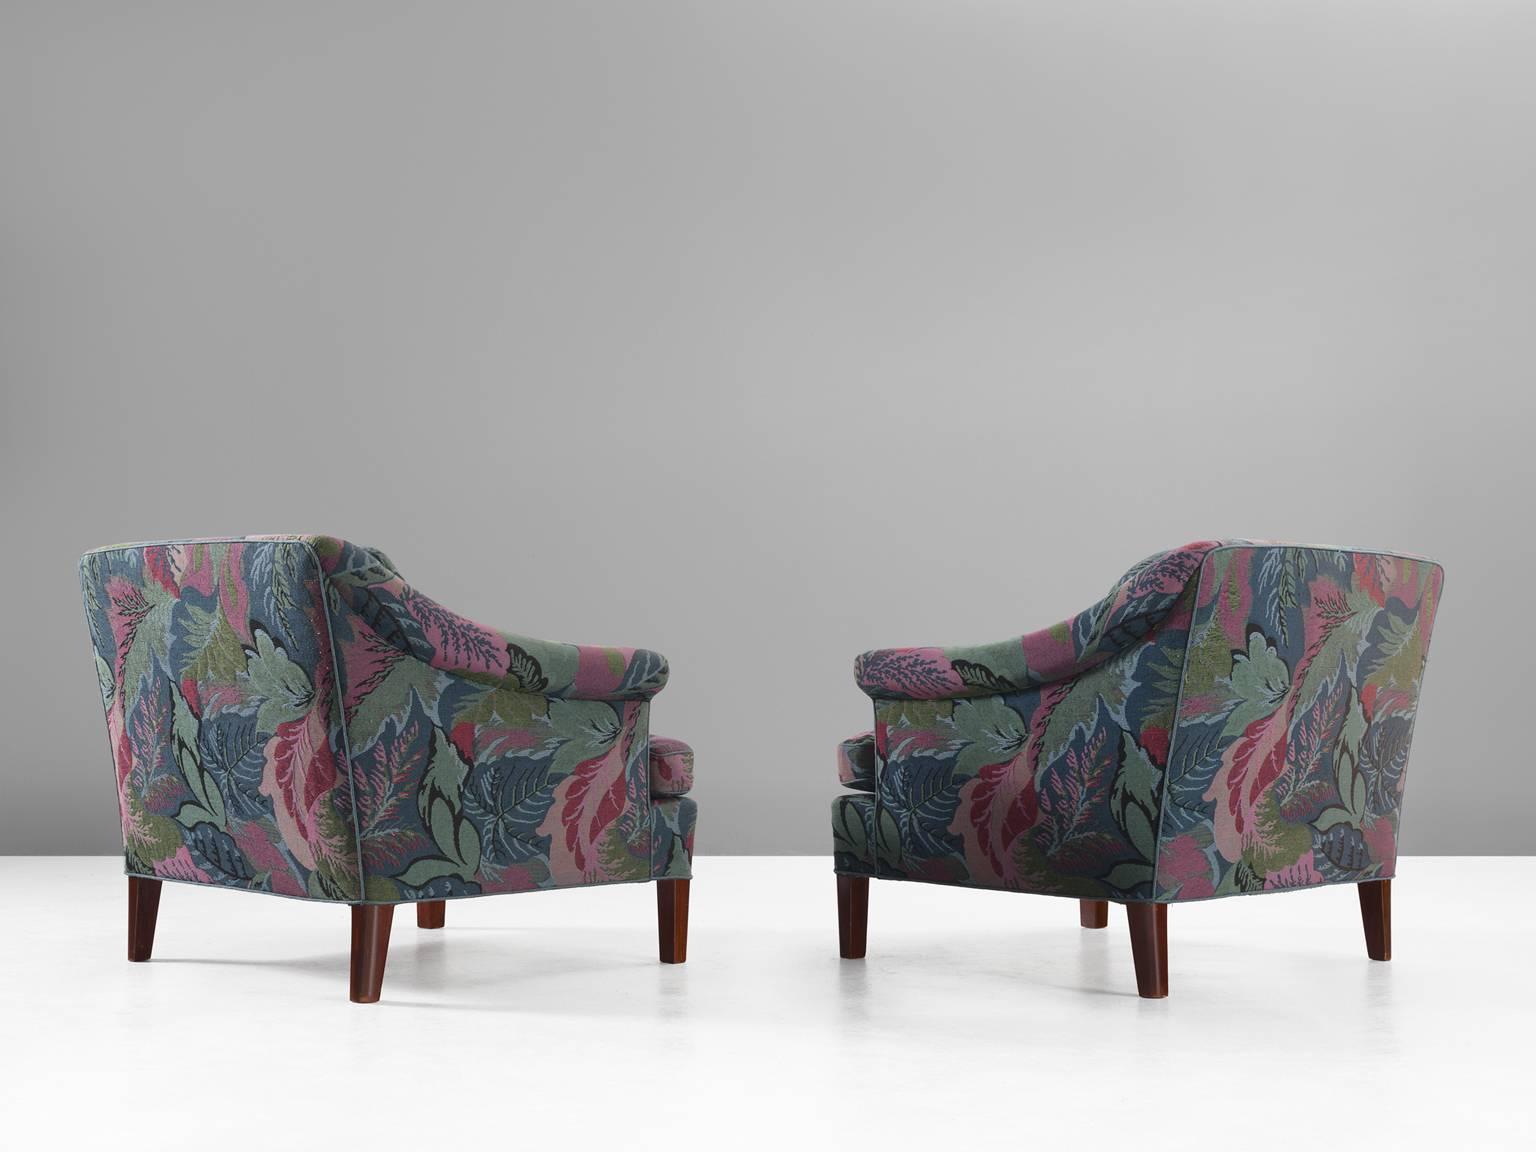 Lysberg Hansen & Therp, sofa three-seat, fabric and wood, Lysberg Hansen & Therp, Denmark, 1970s.

These two voluptuous floral and leaf chairs are robust and elegant at the same time. The sofa appears strong and solid yet the detailing on the back